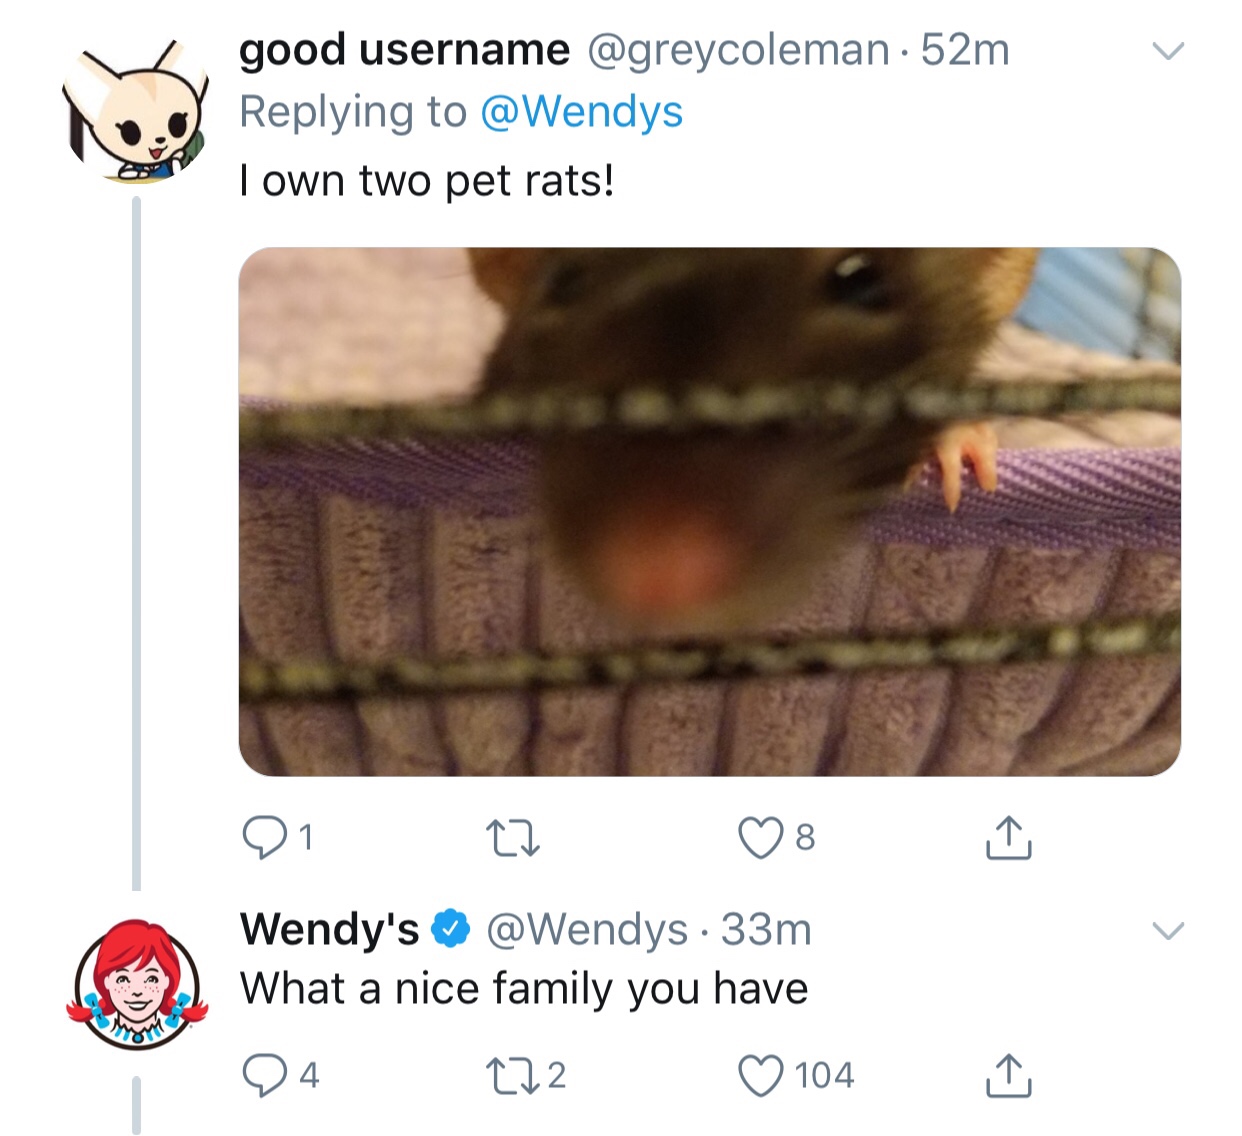 tweet - wendy's company - good username 52m I own two pet rats! 012781 Wendy's 33m What a nice family you have 04 272 0104 I